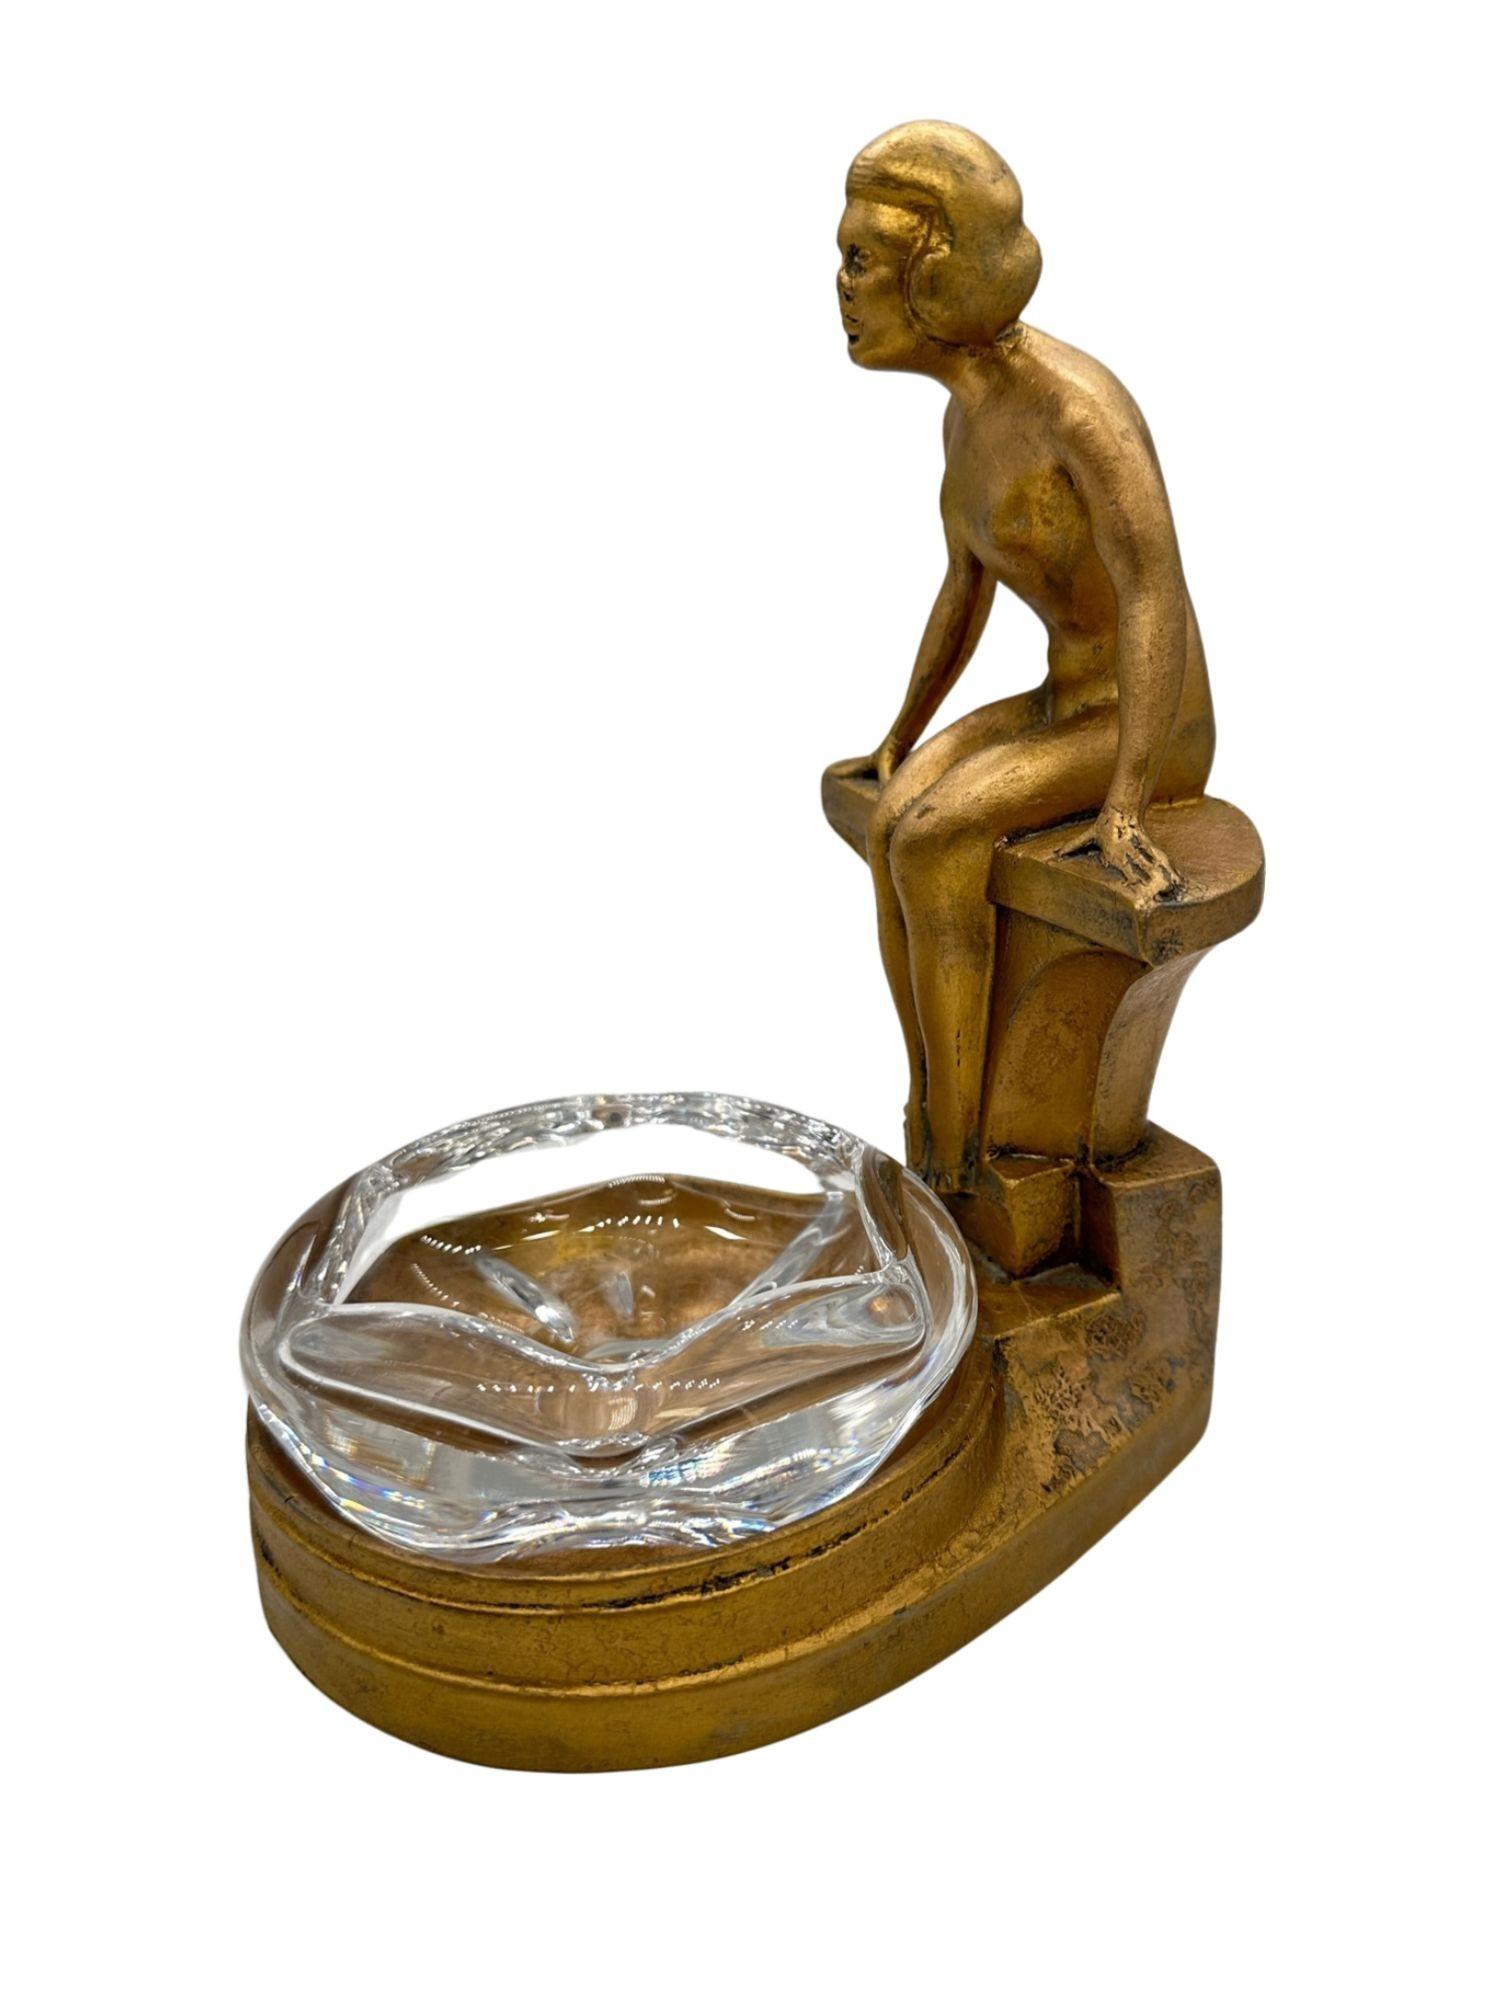 A stunning Art Deco 'NuArt Creations' figural female nude from the 1930s gracefully sits by a pool. This metallic piece, originally designed as an ashtray, features an elegant bronze finish and prominently displays the 'NuArt Creations' emblem at